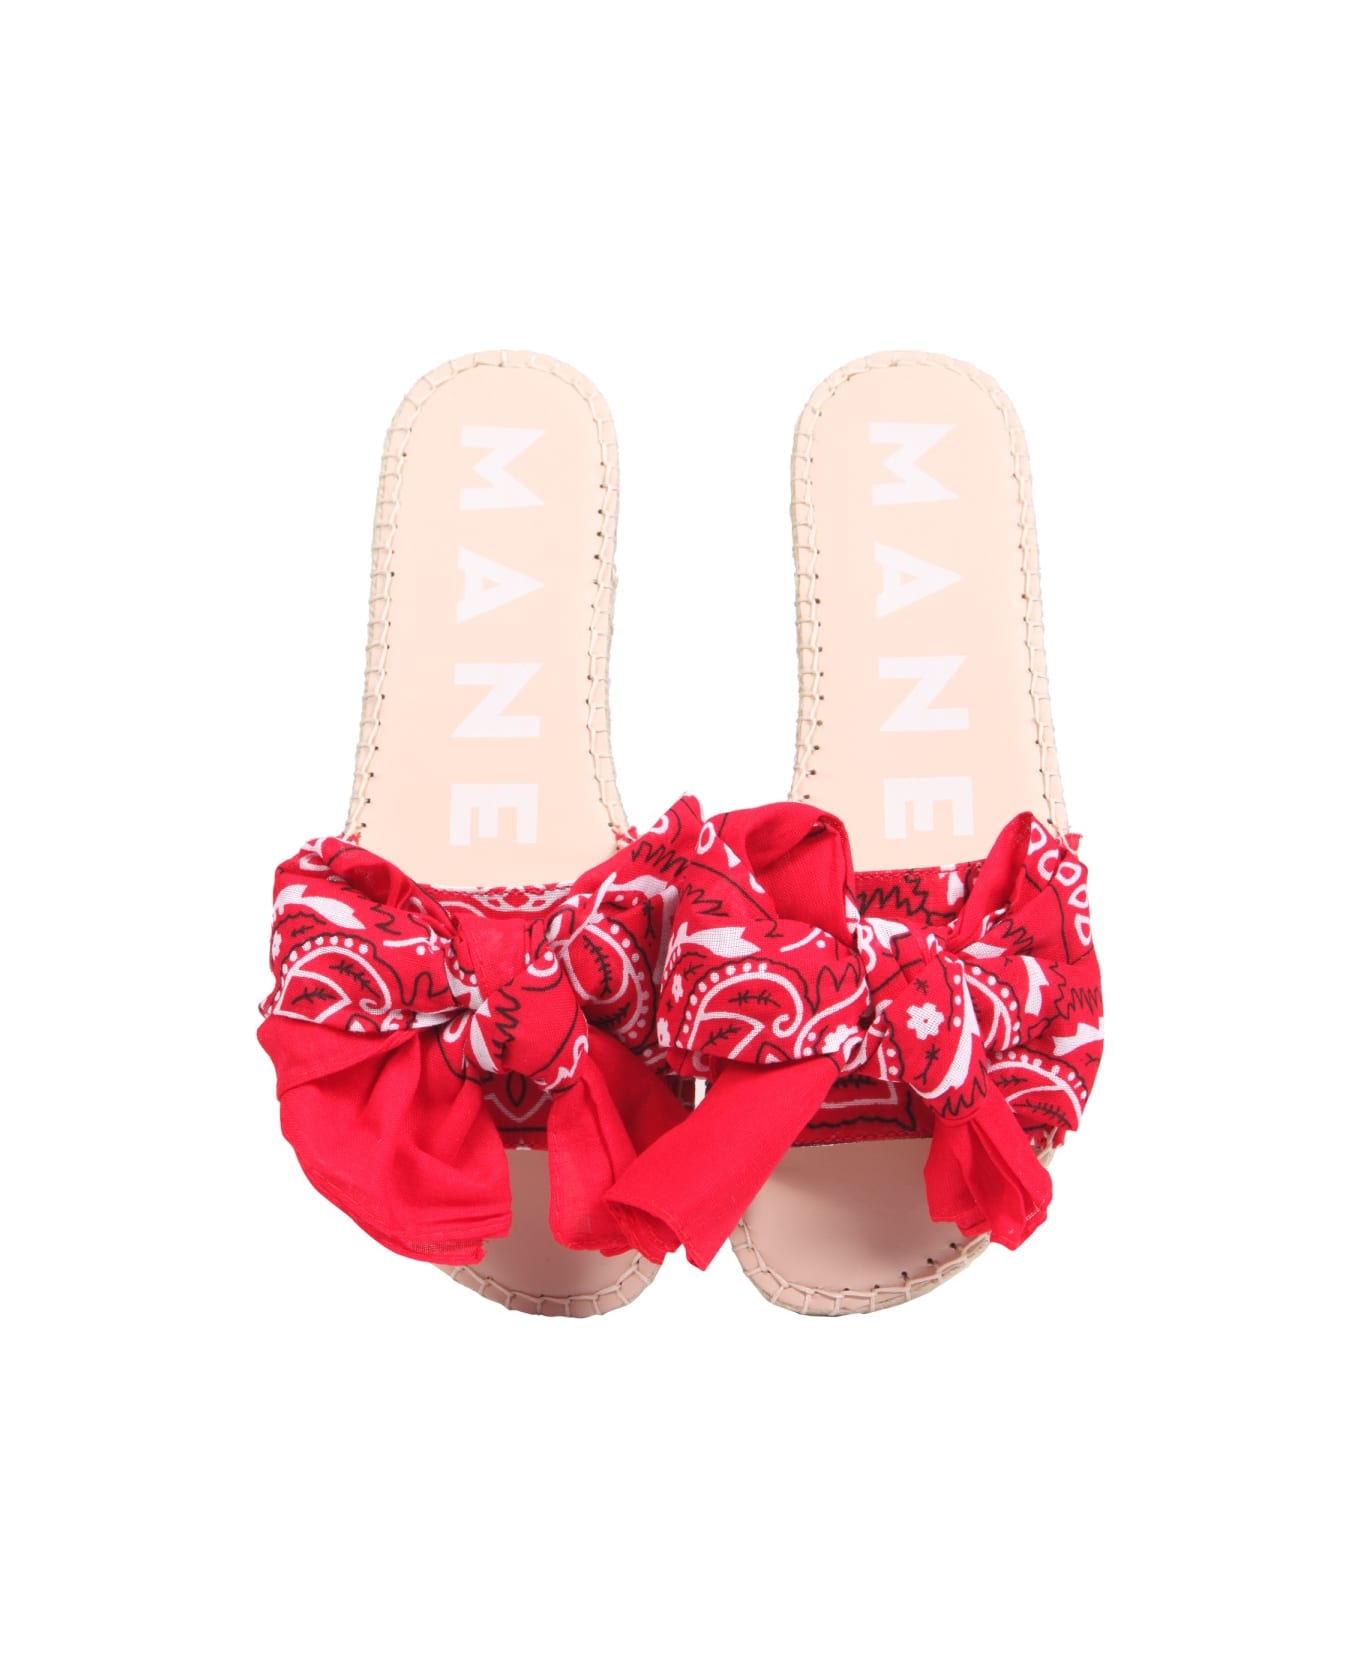 Manebi Low Sandals With Bandana Bow - RED